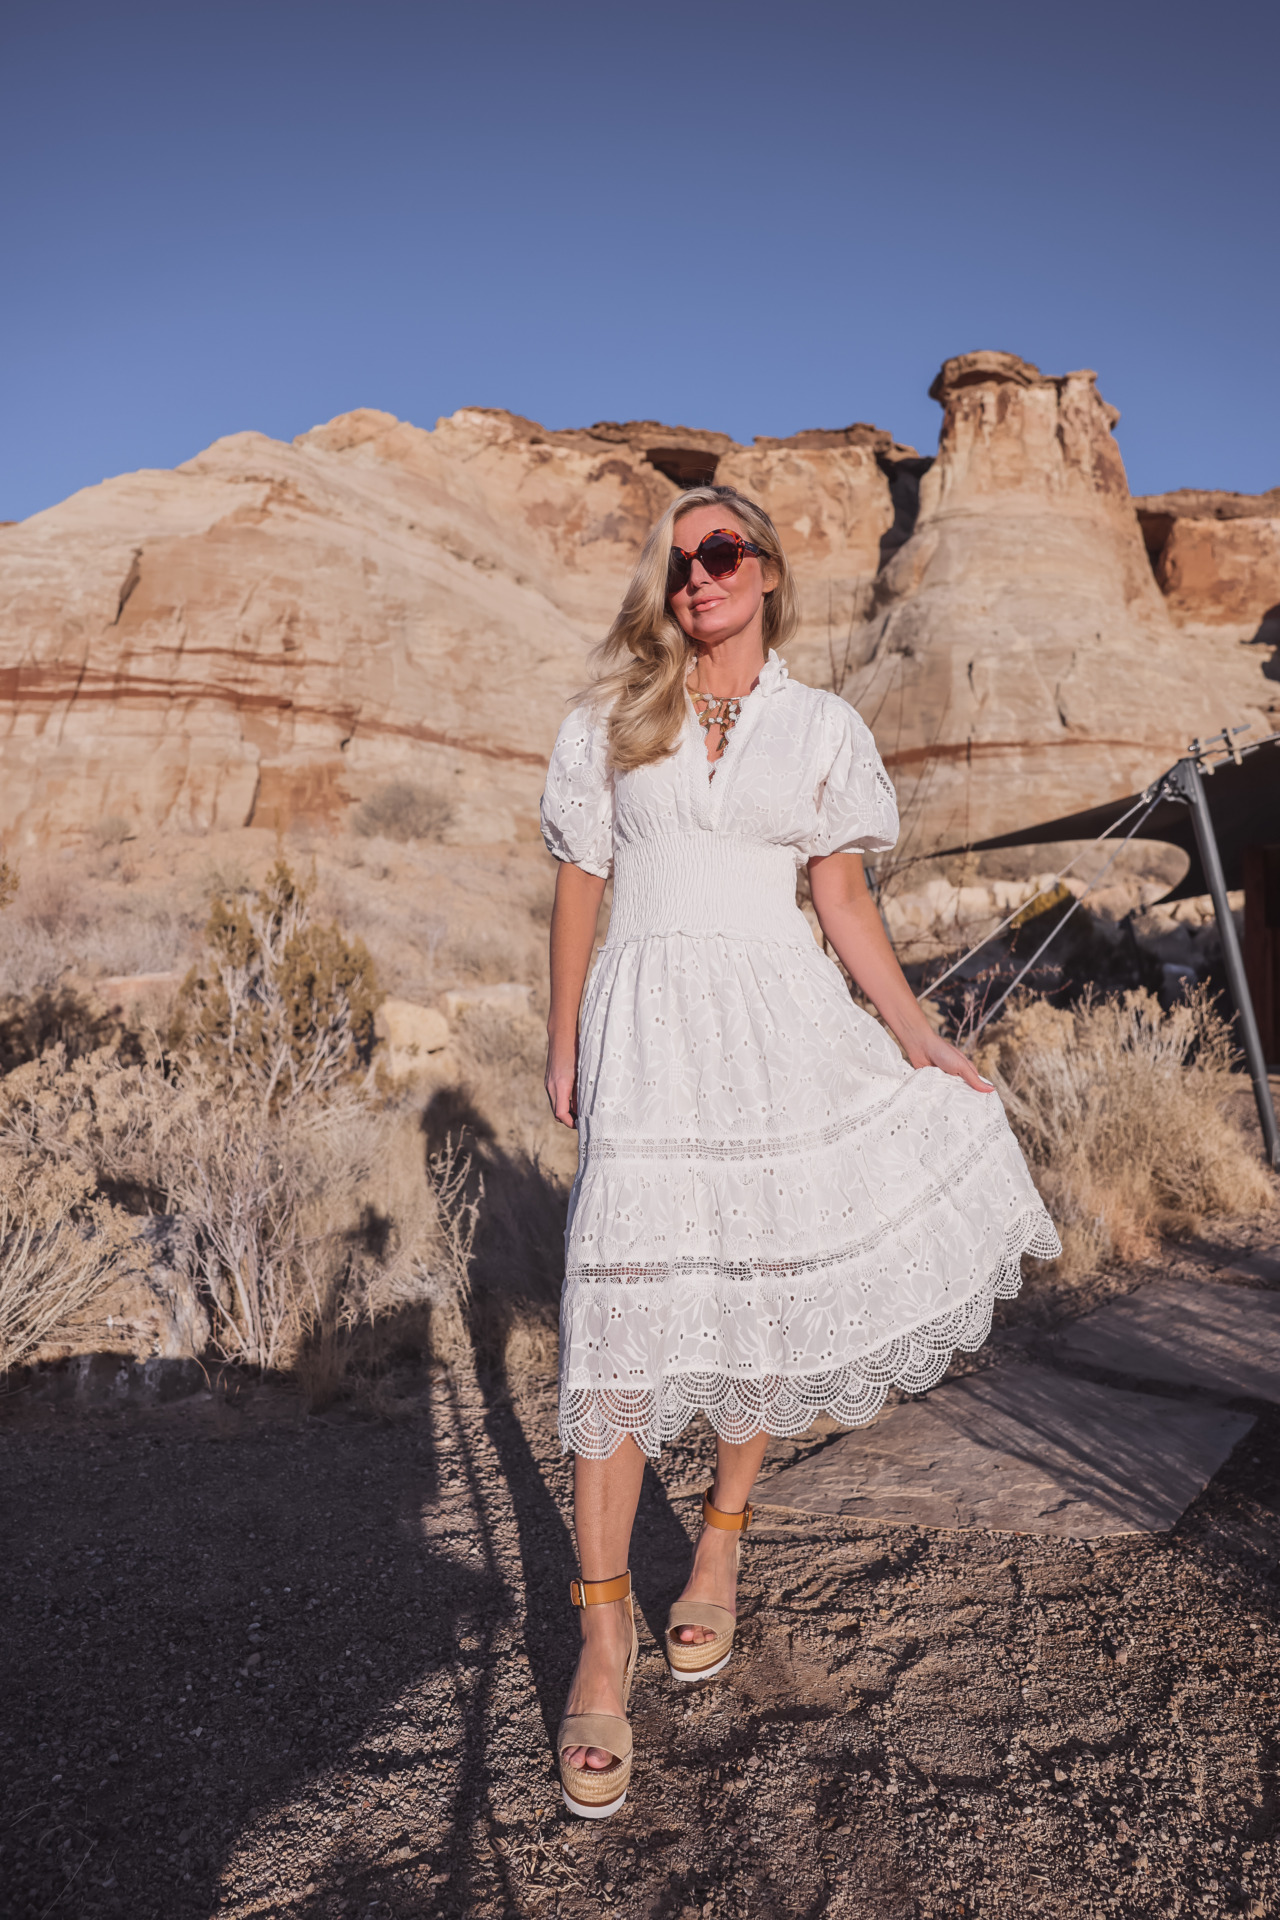 white dresses, resort white dresses, best white dresses, white dresses over 40, what to wear on vacation, summer white dresses, spring white dresses, erin busbee, busbee style, waimari white midi dress, see by chloe wedges, ulla johnson statement necklace, gucci round sunglasses